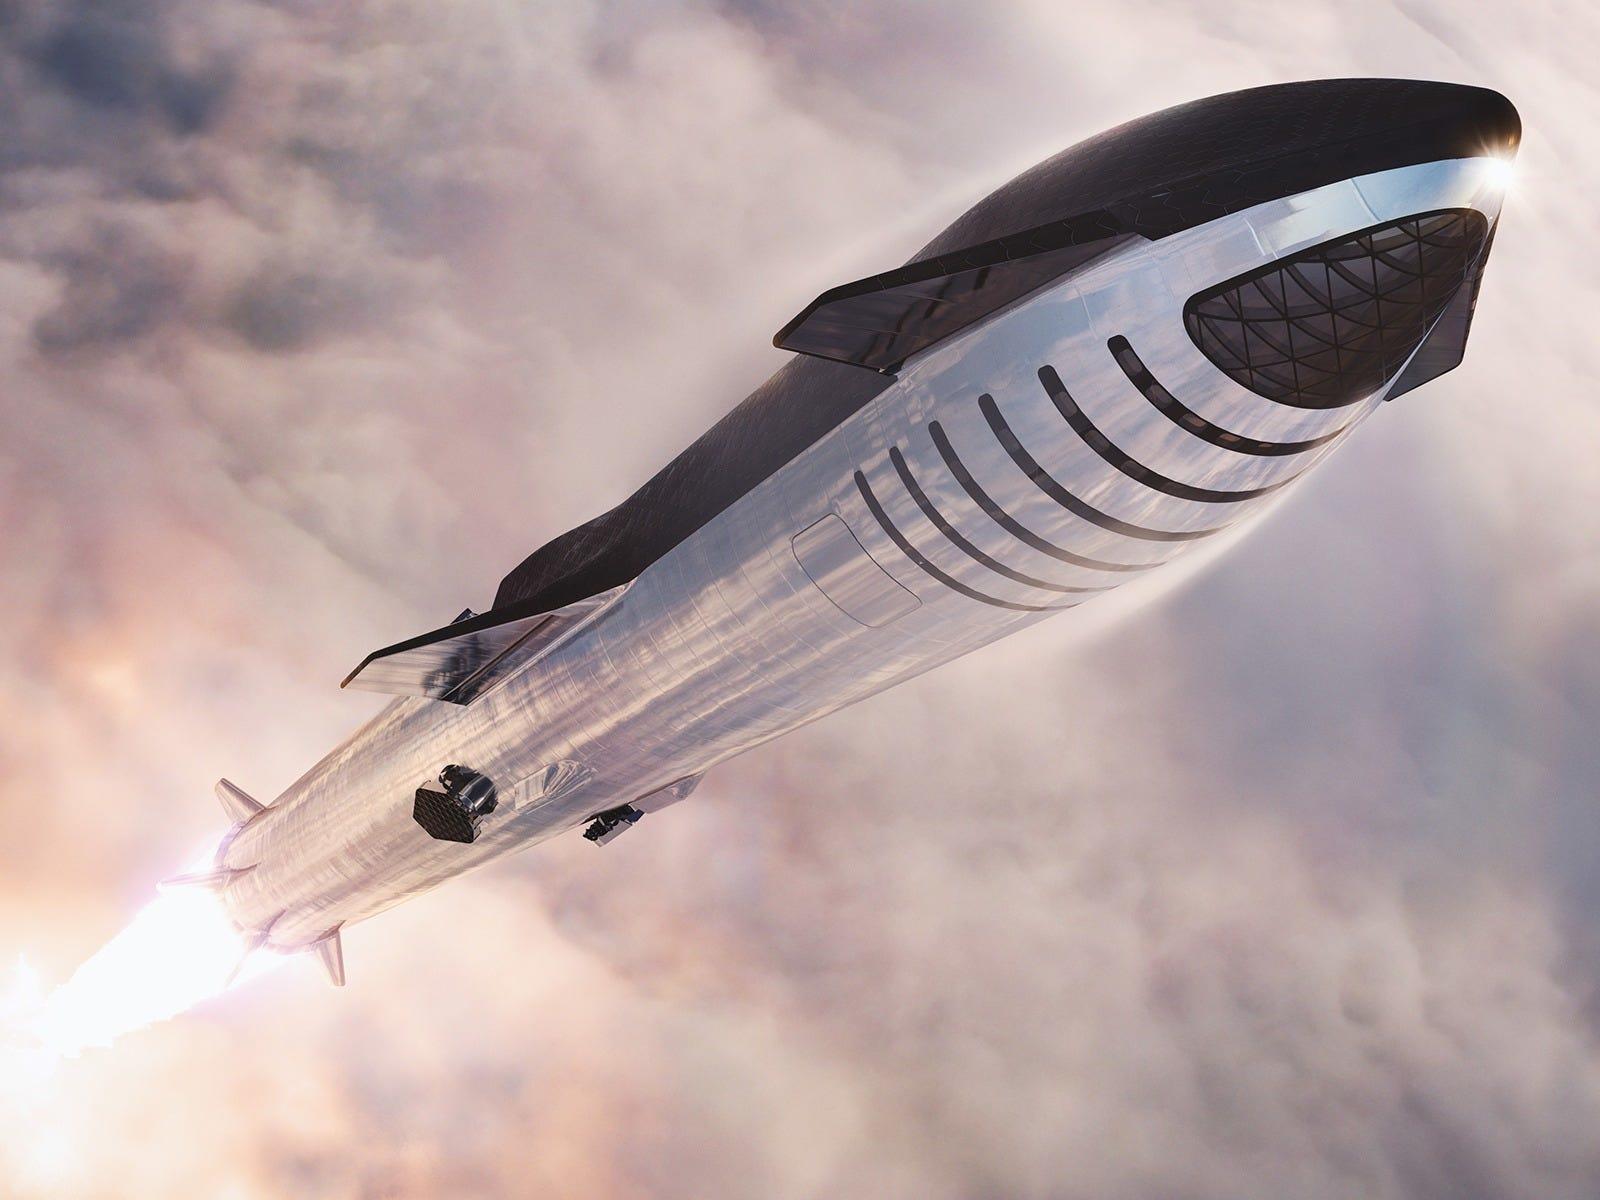 SpaceX faces a new FAA hurdle before it can launch Starships to orbit